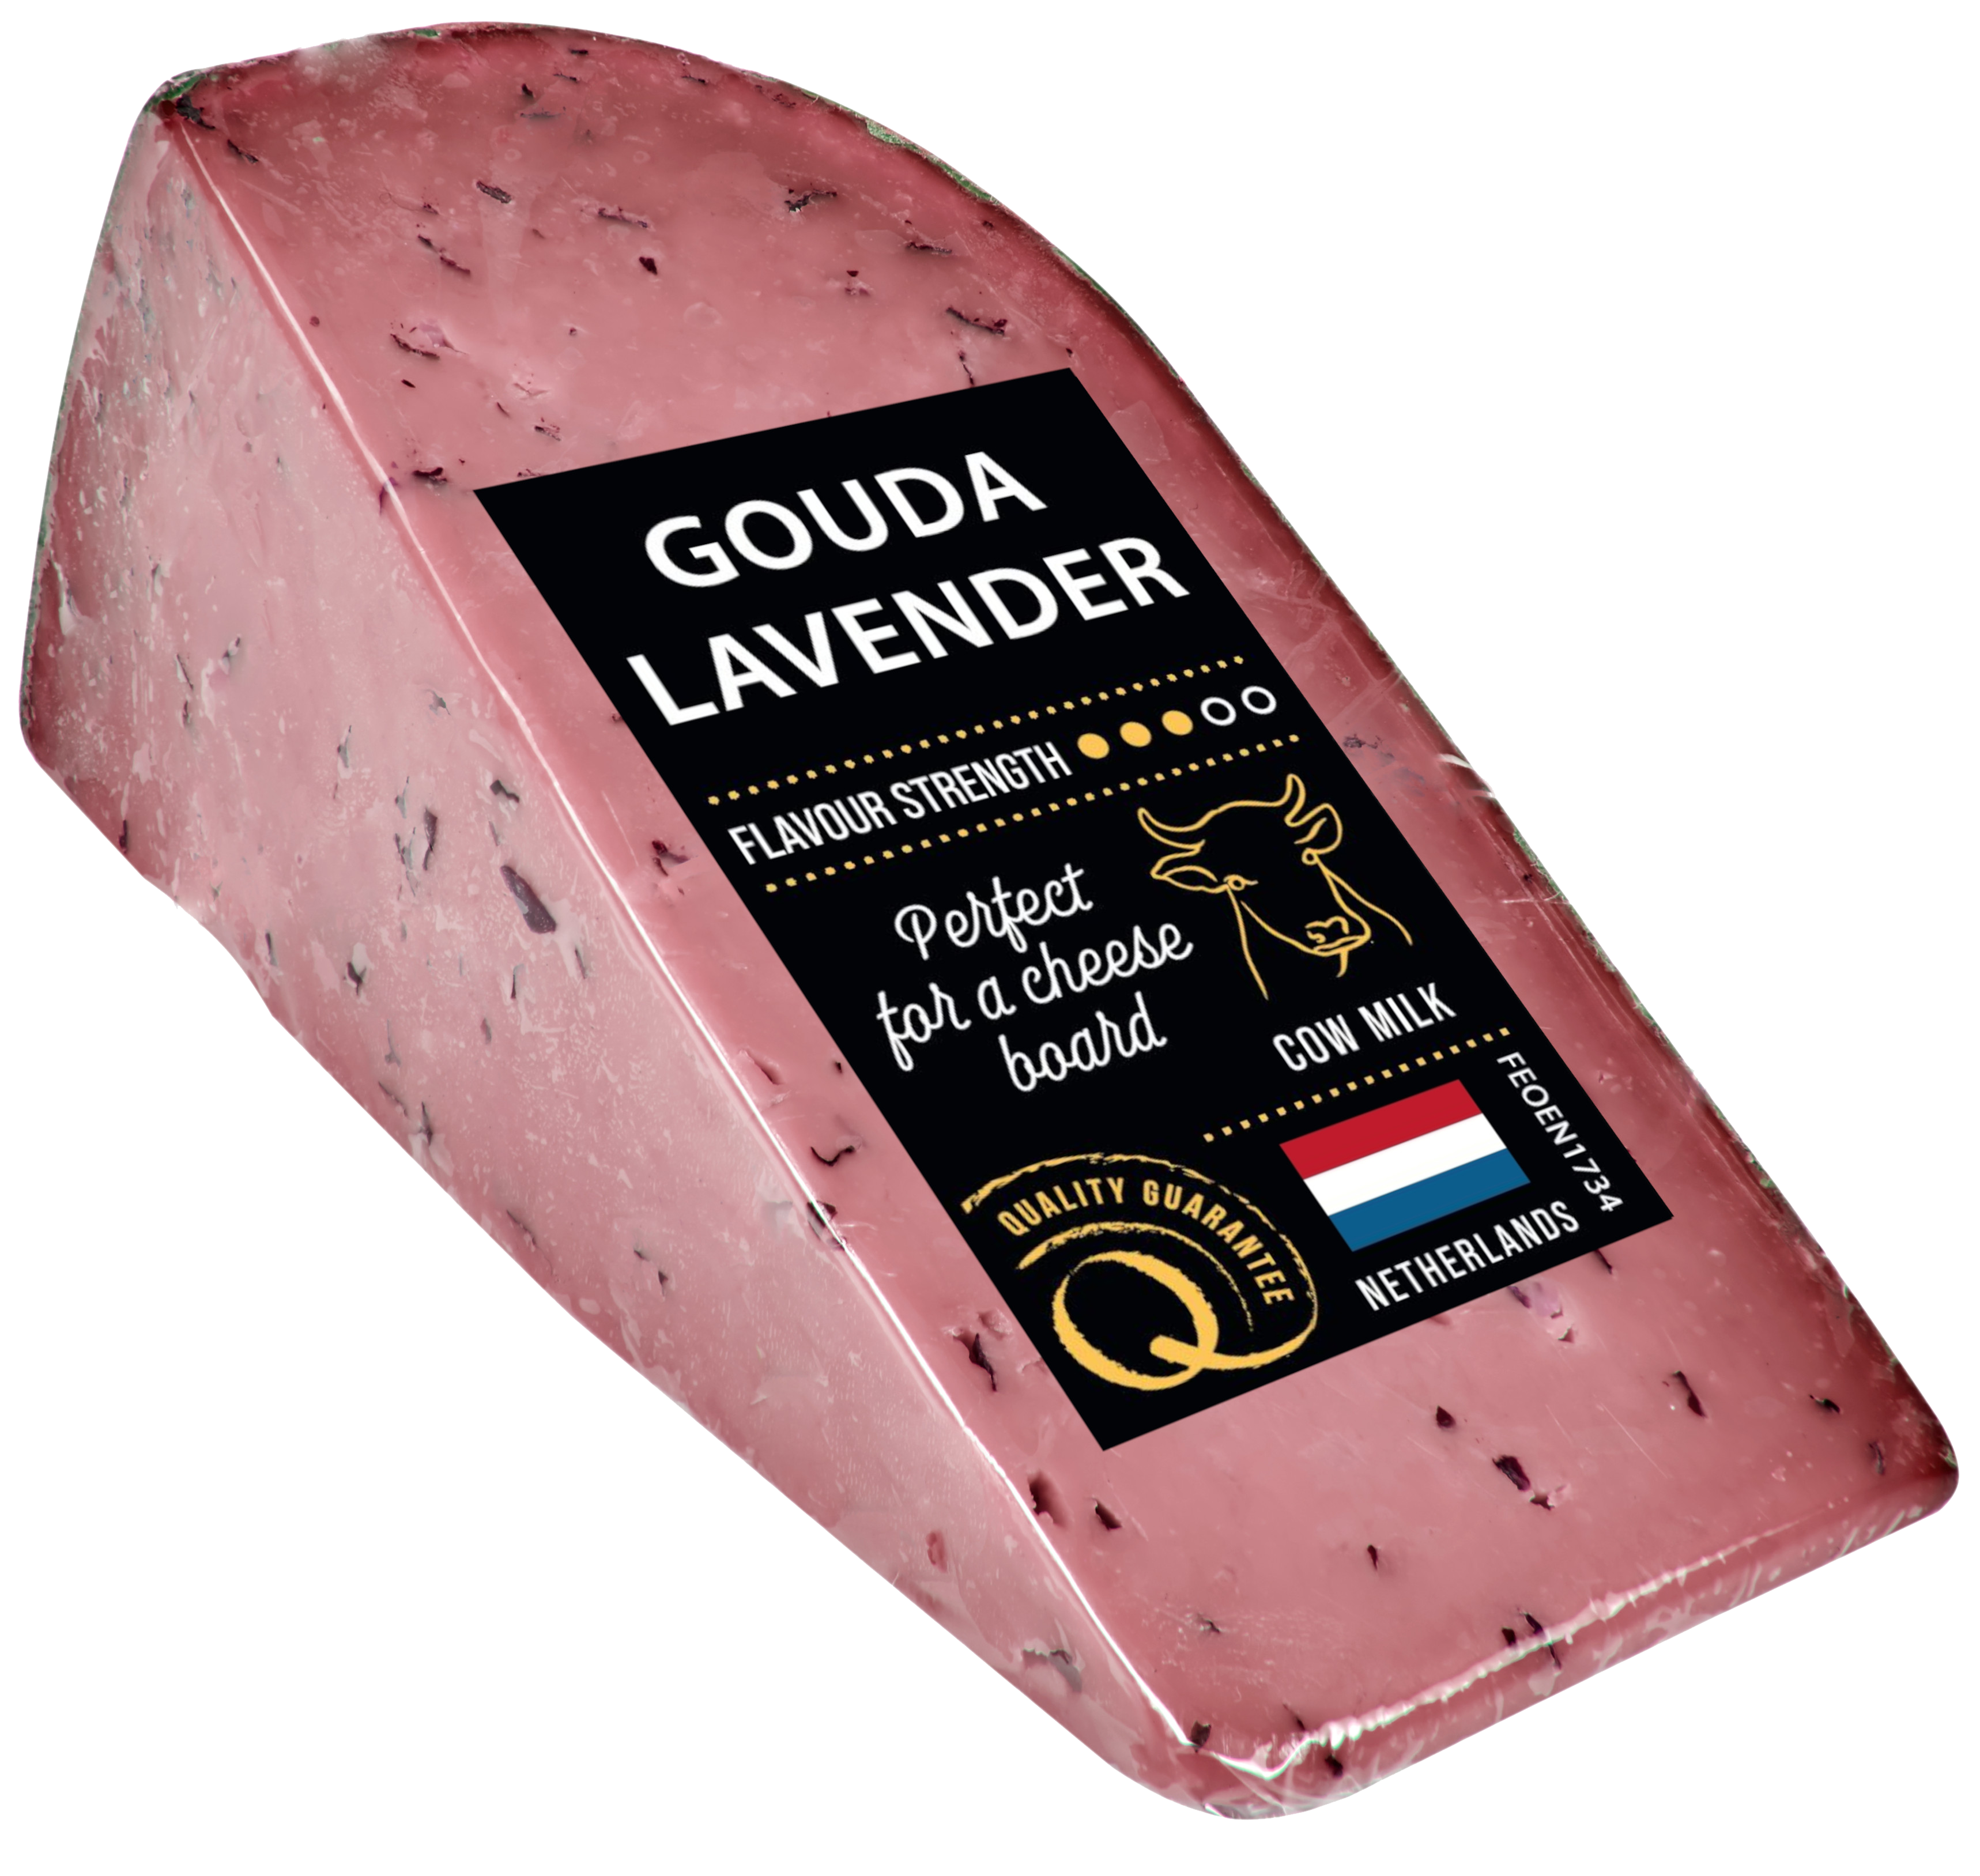 Gouda with Lavender